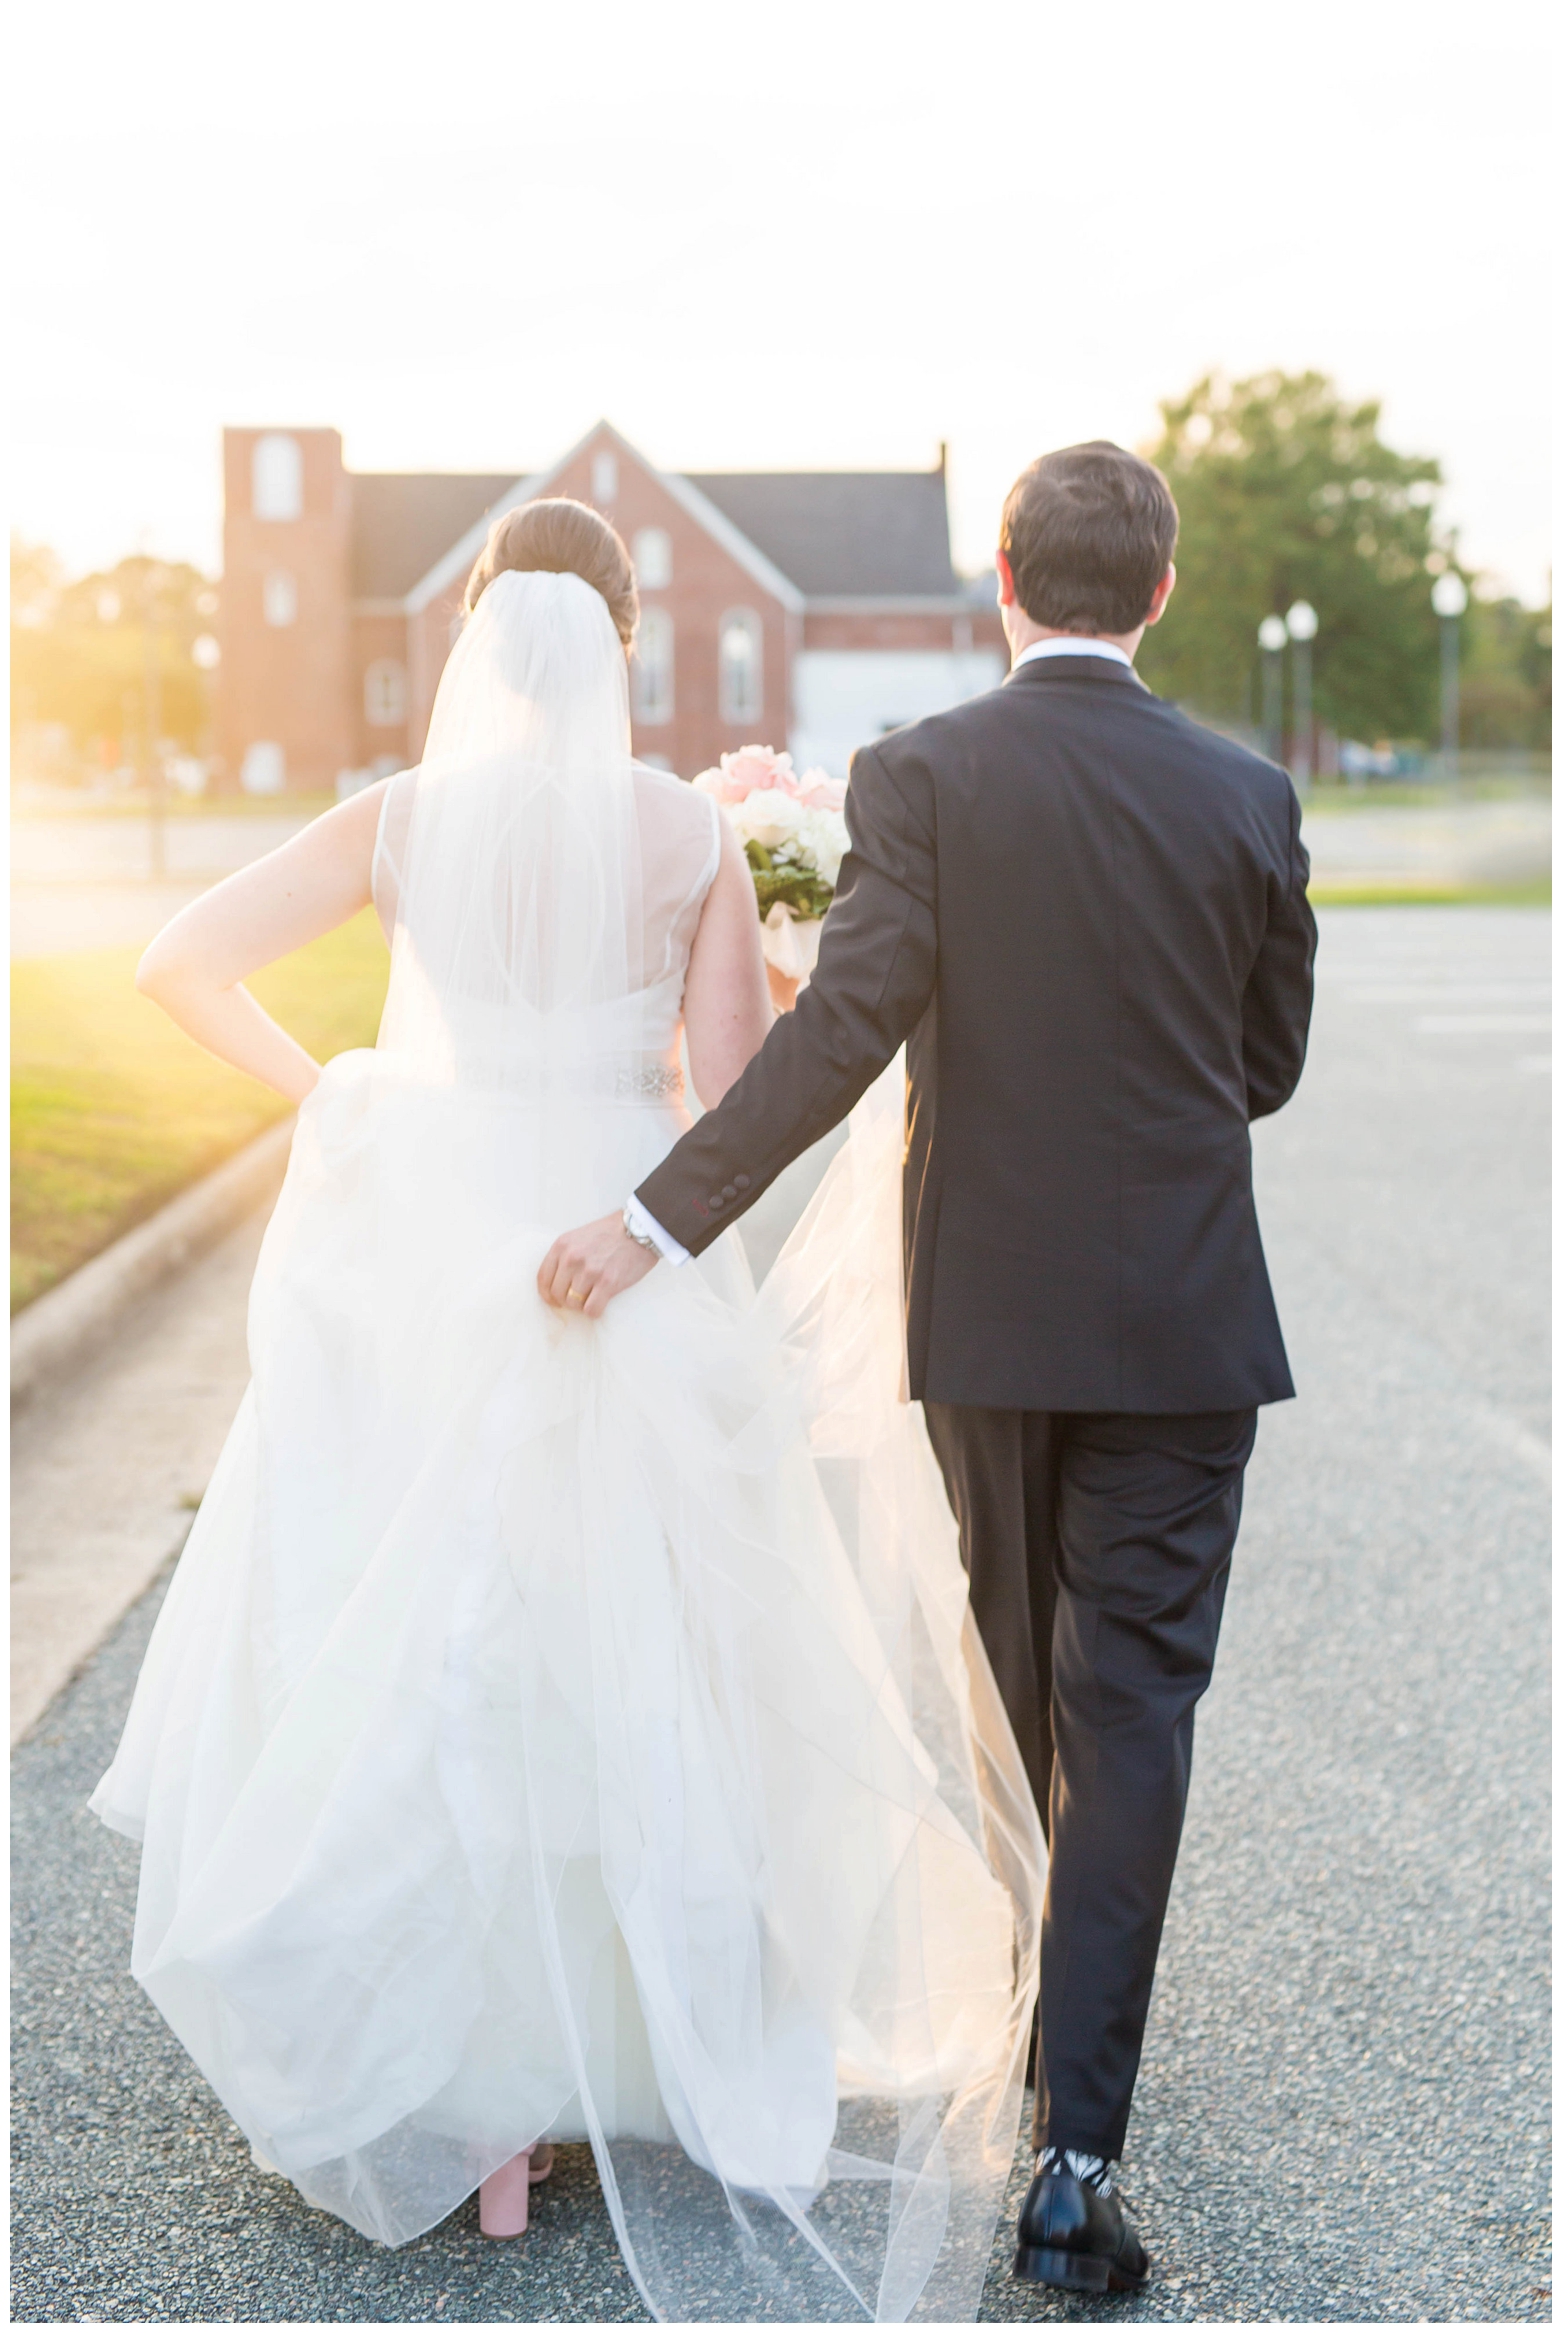 View More: http://hopetaylorphotographyphotos.pass.us/anne-and-eric-wedding